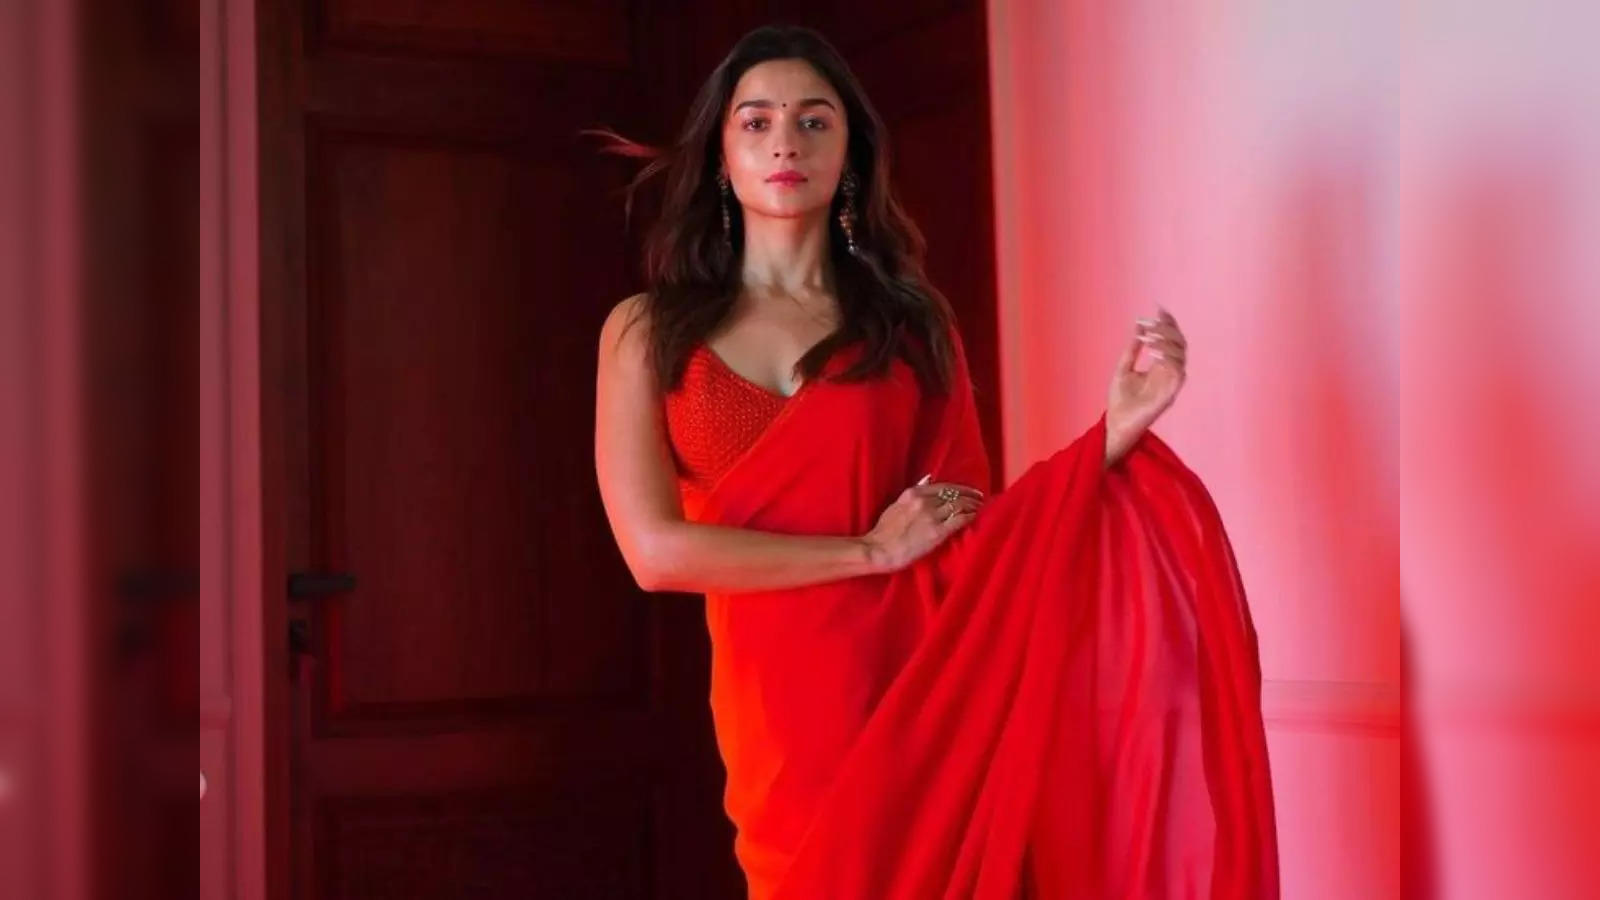 Aliyabhattxxx - alia bhatt: Deepfake: Actress Alia Bhatt morphed video gets attention  online; increases concern over misuse of technology - The Economic Times